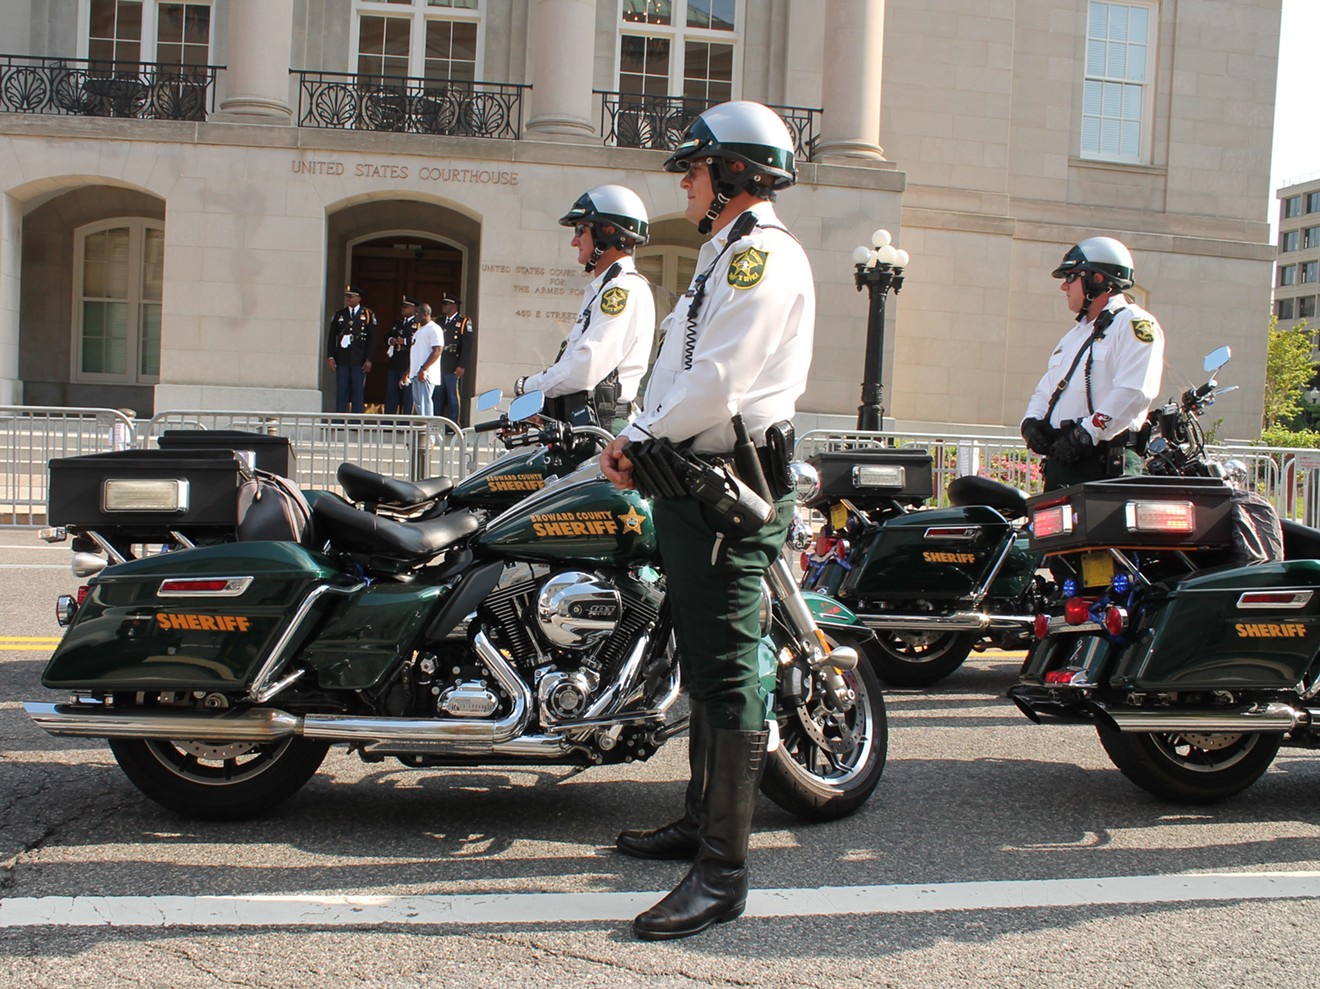 The Broward Sheriff's Office participates in a ceremony at the National Law Enforcement Officers Memorial in Washington, D.C.